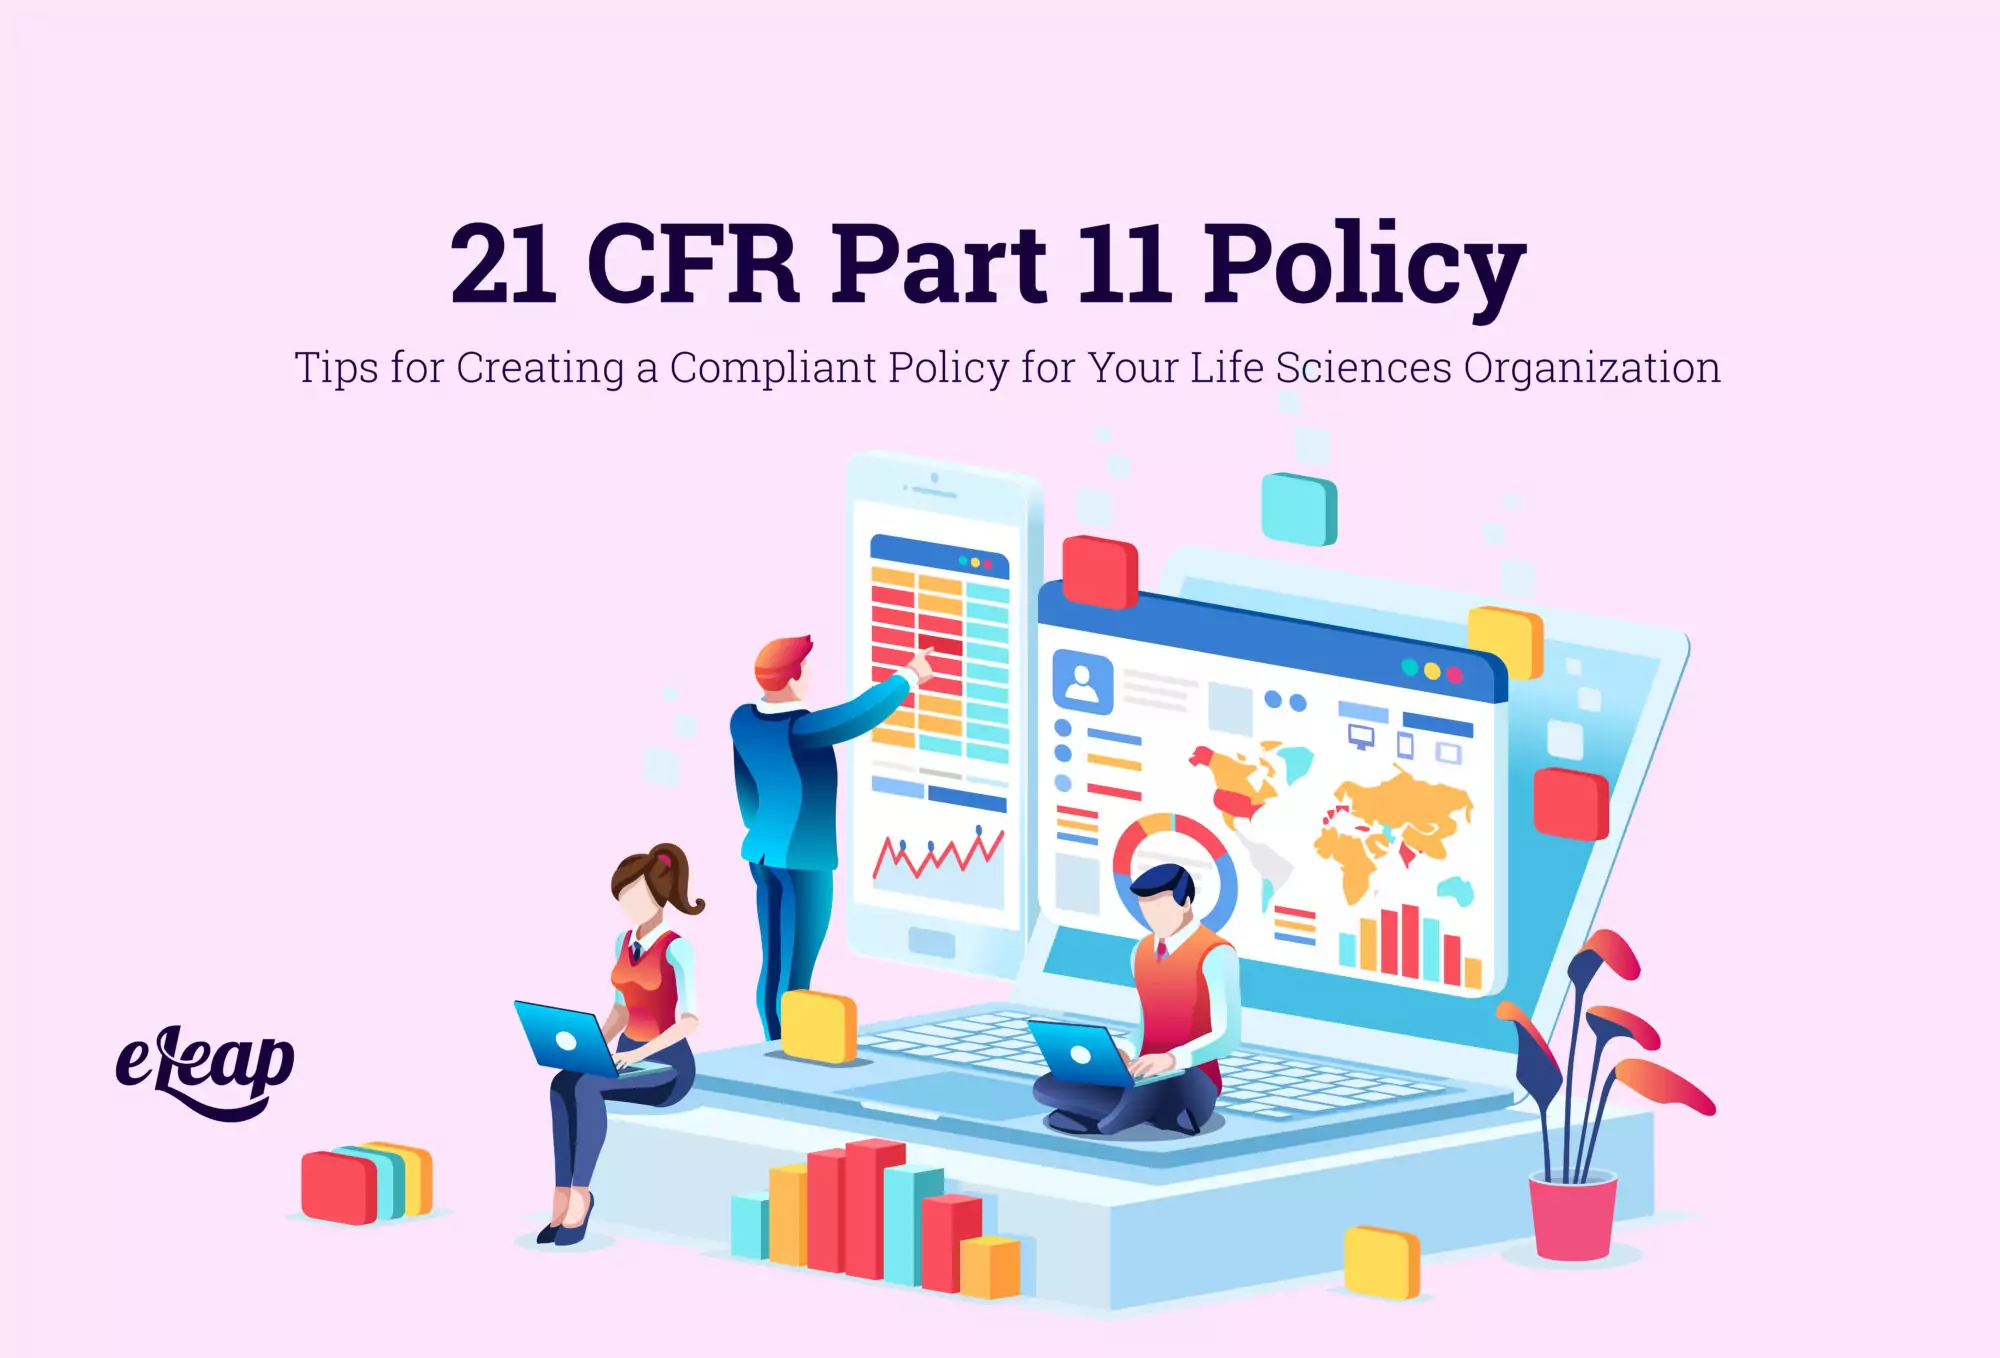 21 CFR Part 11 Policy